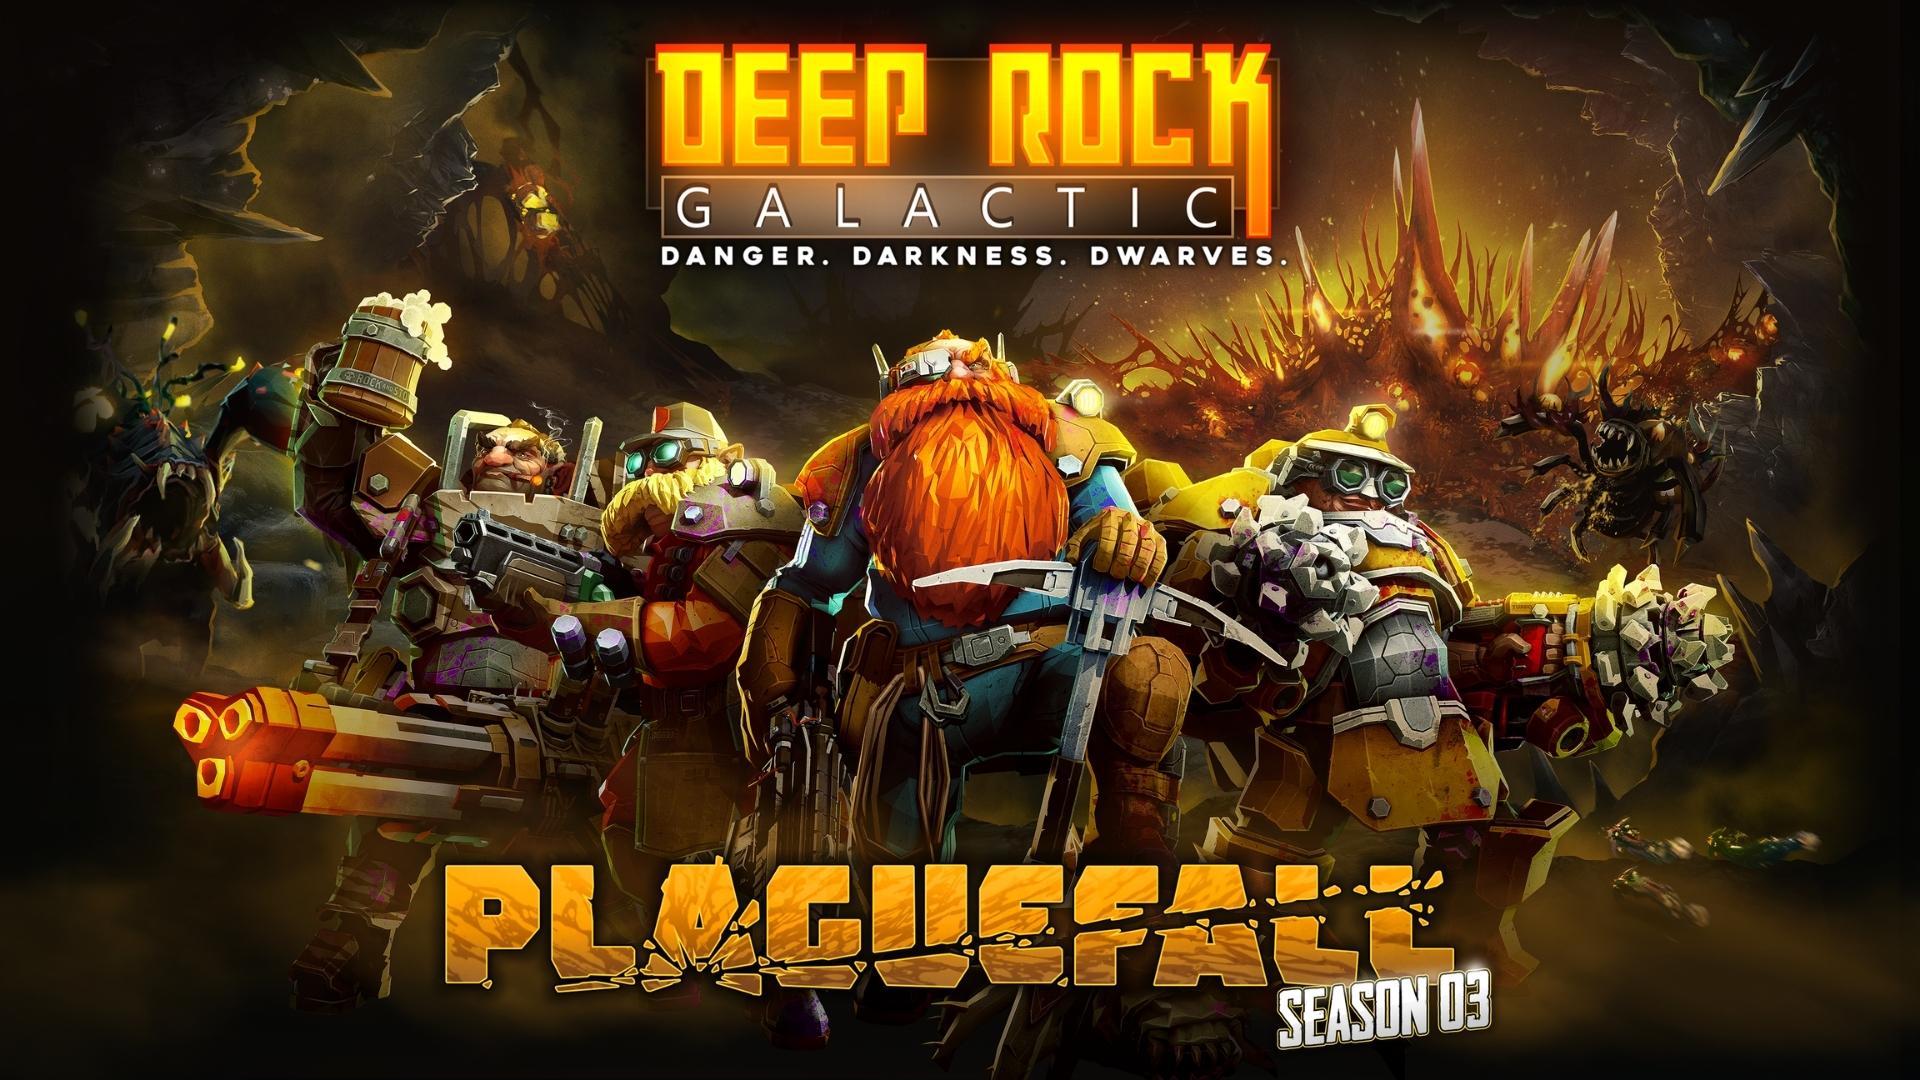 Deep Rock Galactic nearly tripled its user base, sold 2.3M units in 2022